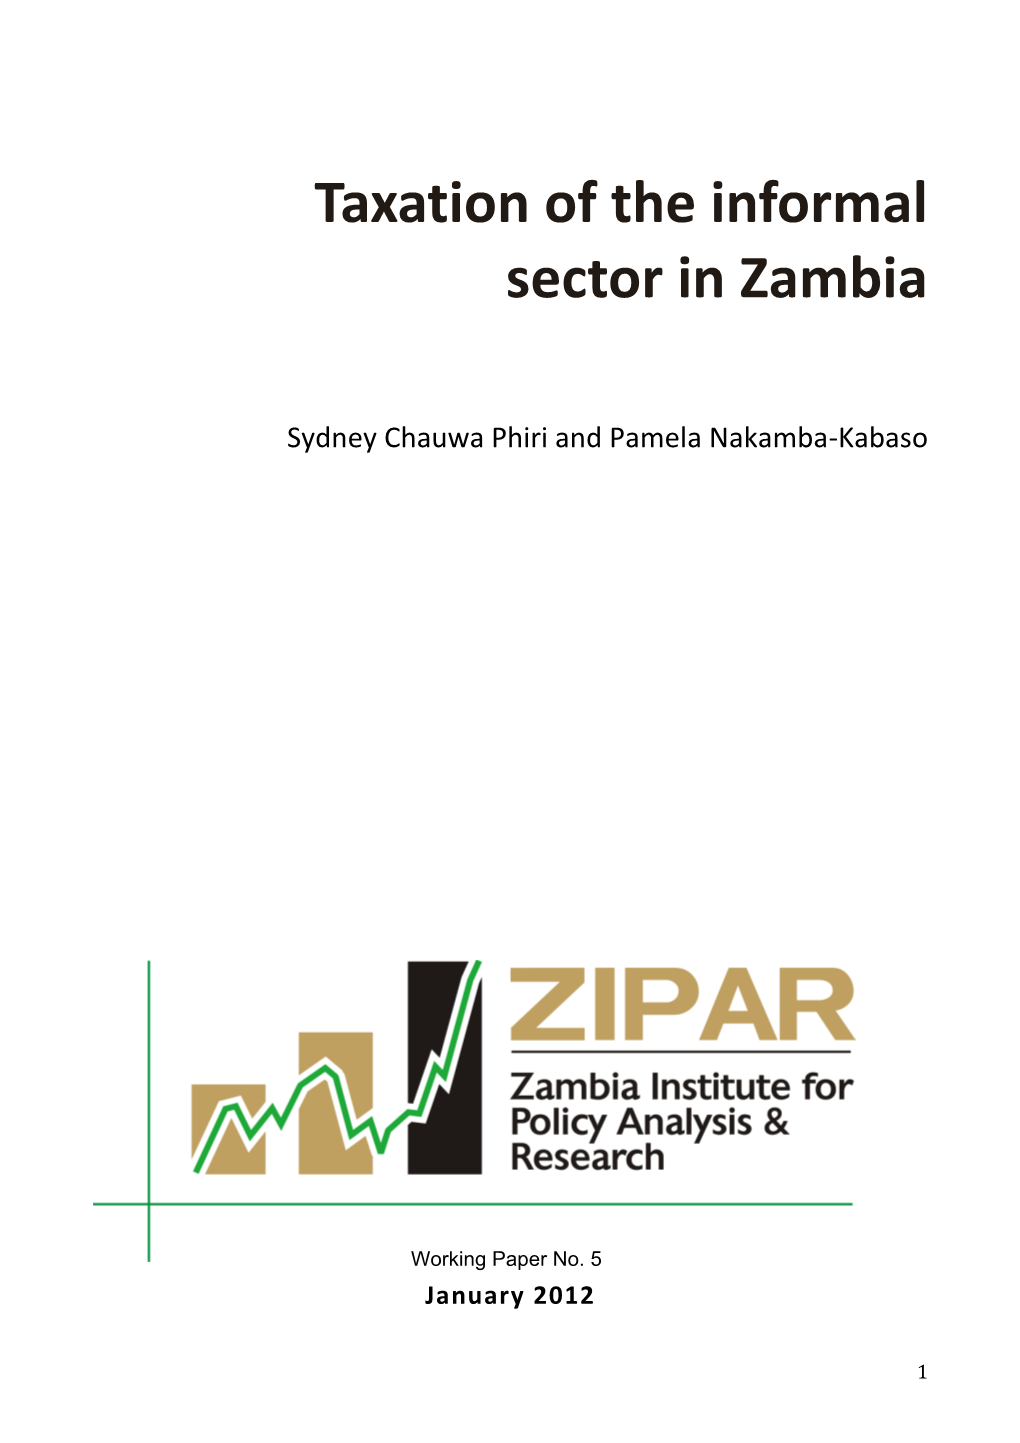 Taxation of the Informal Sector in Zambia